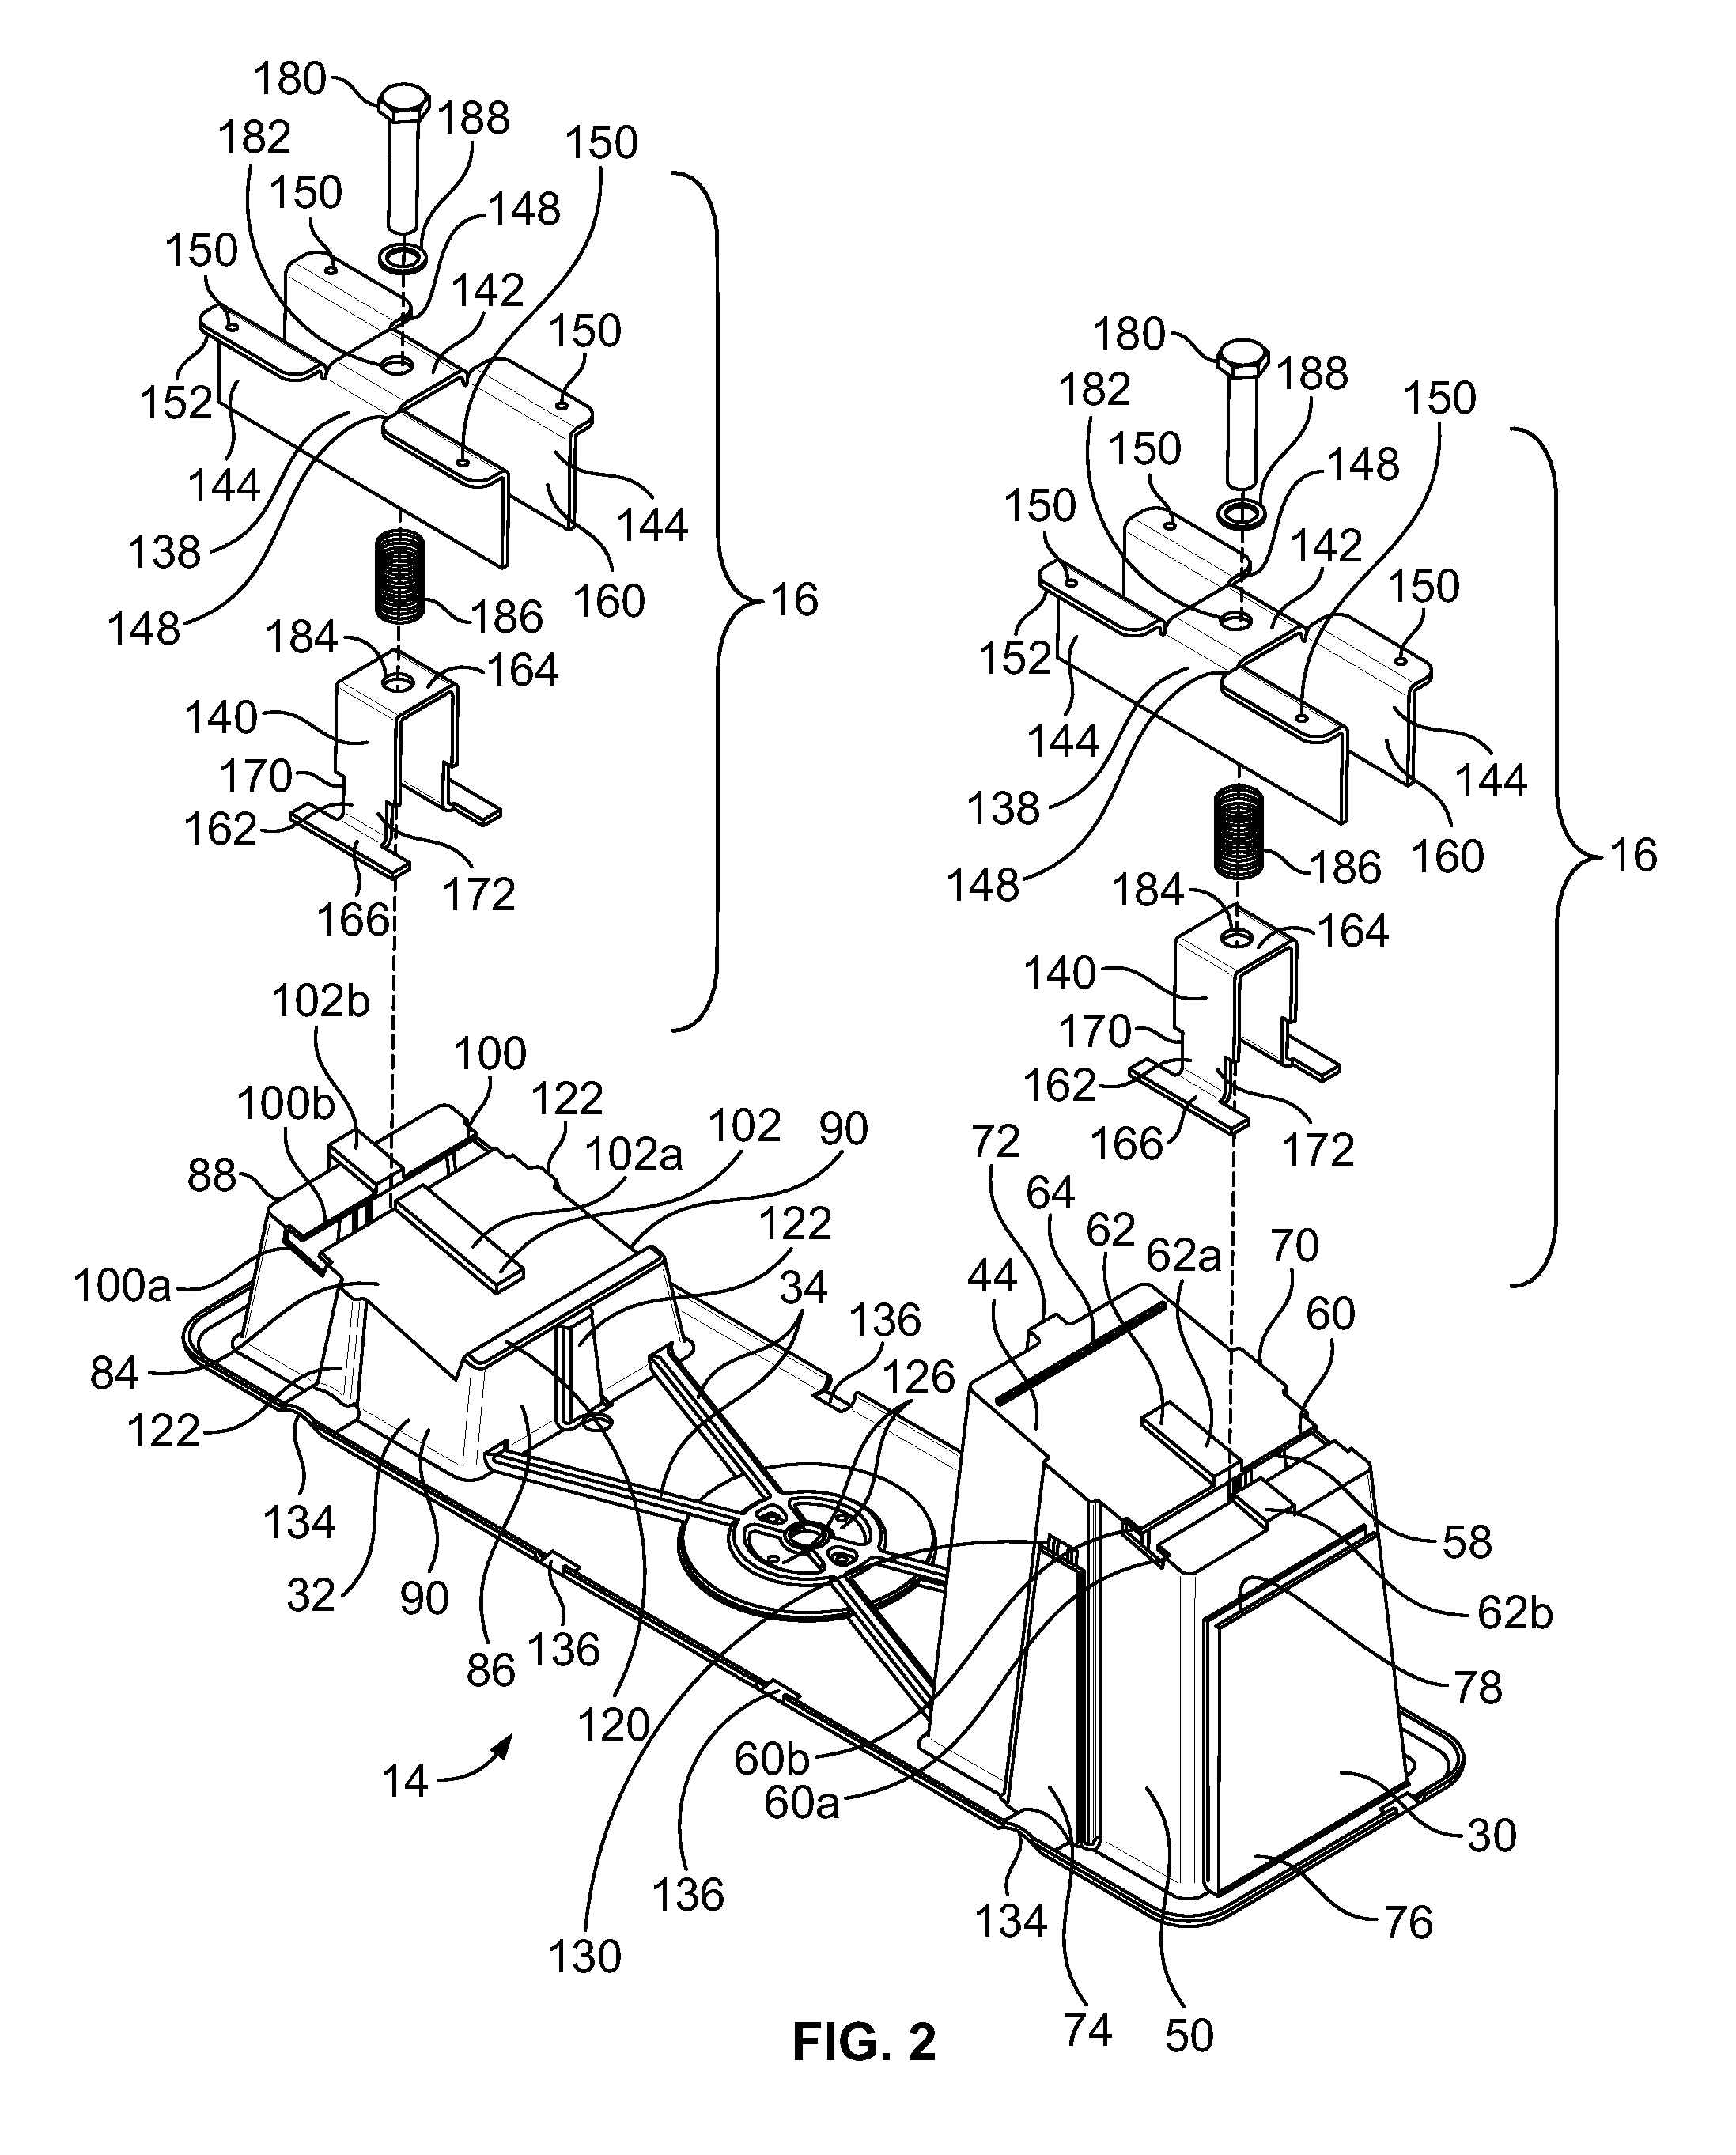 System for mounting solar modules